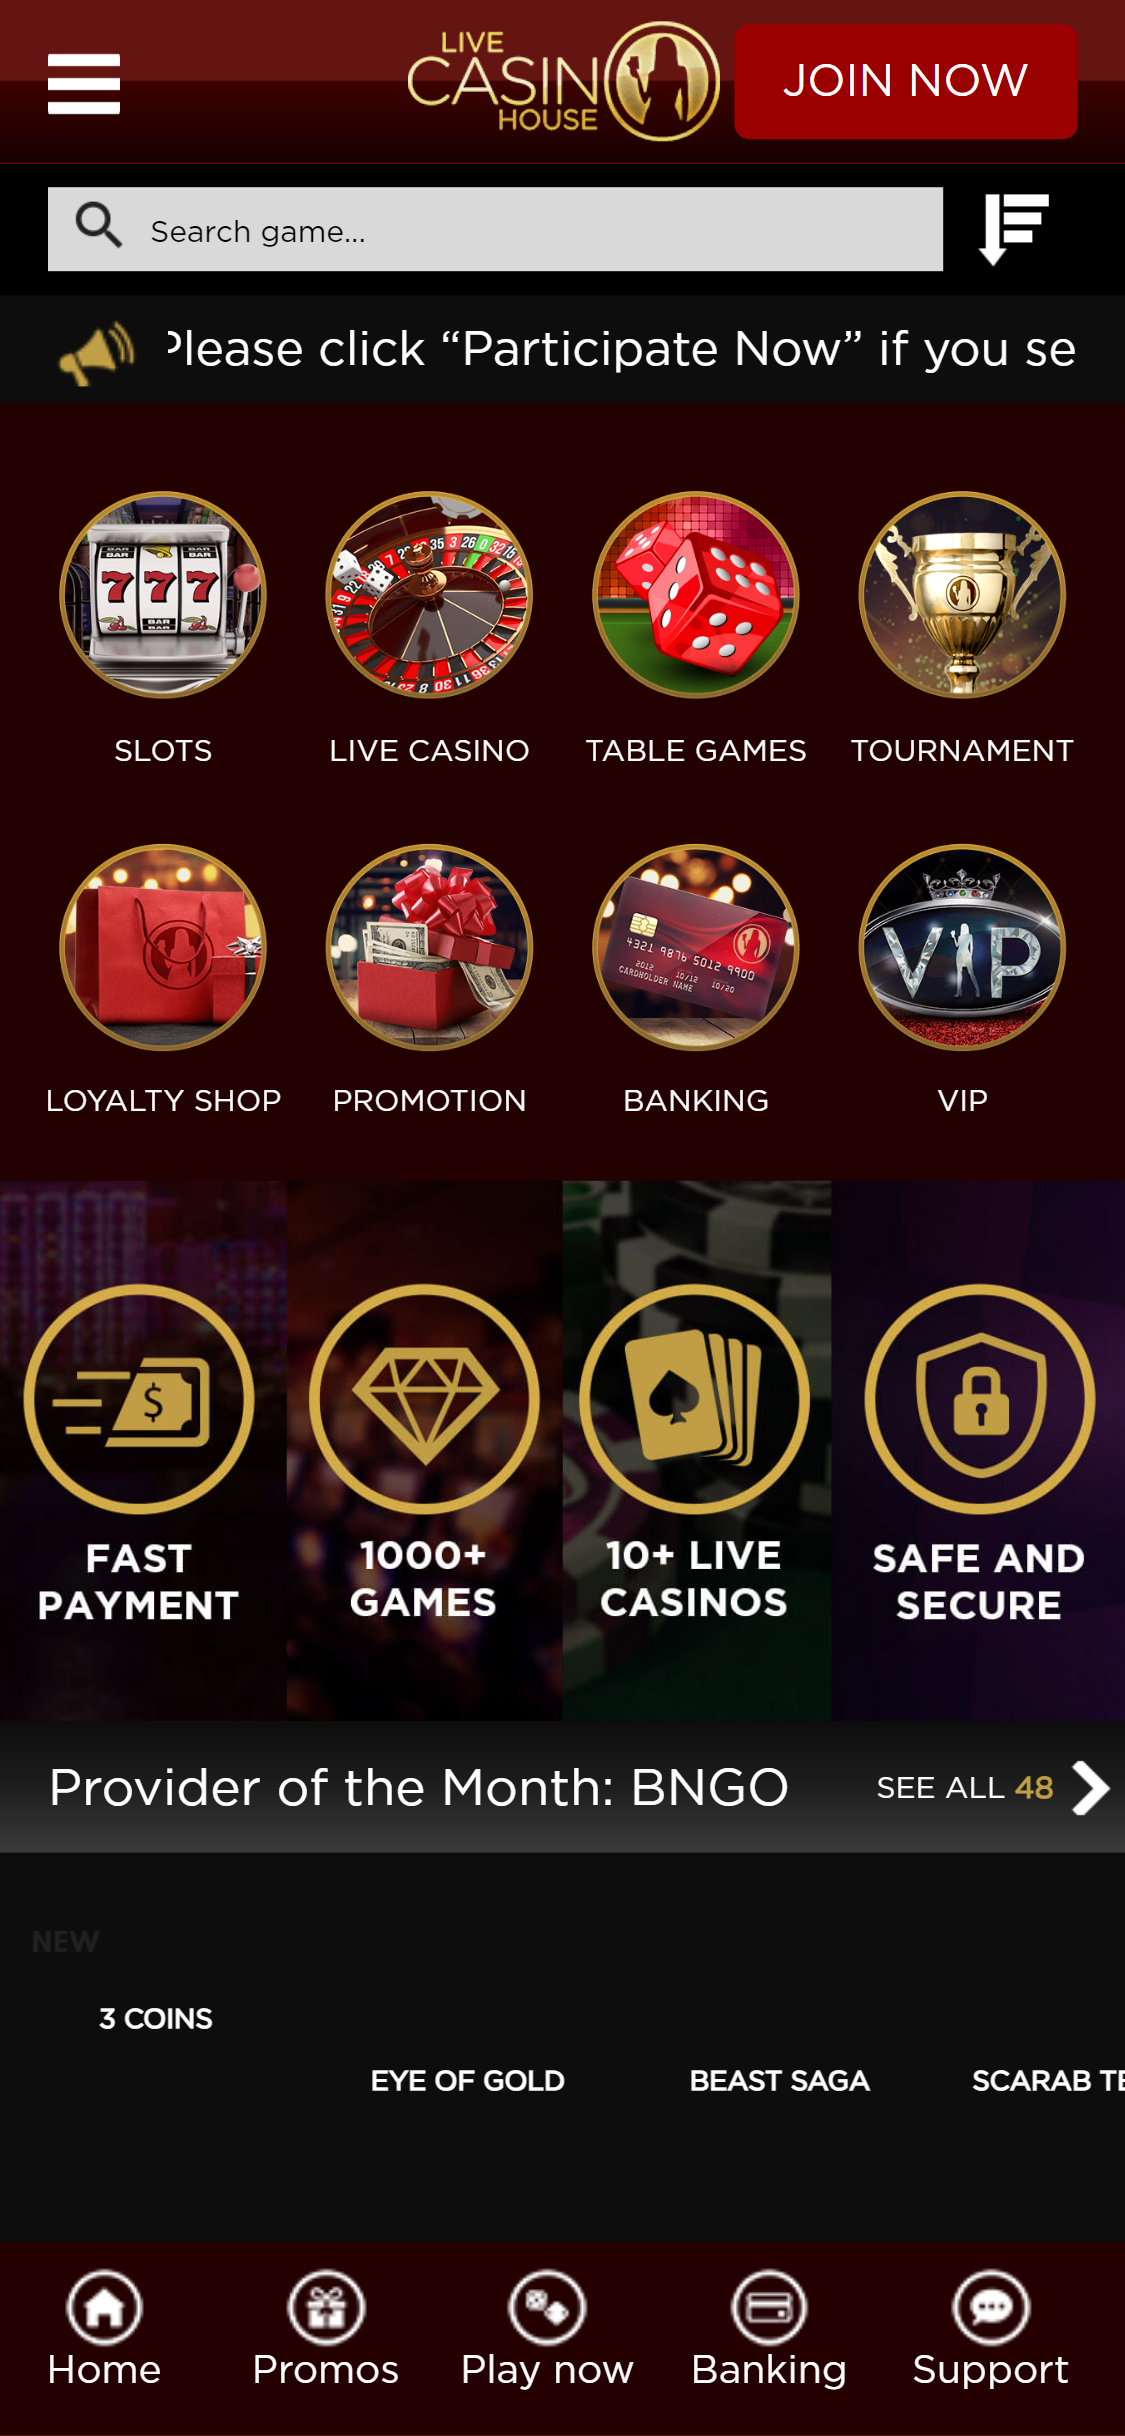 Live Casino House Mobile Review